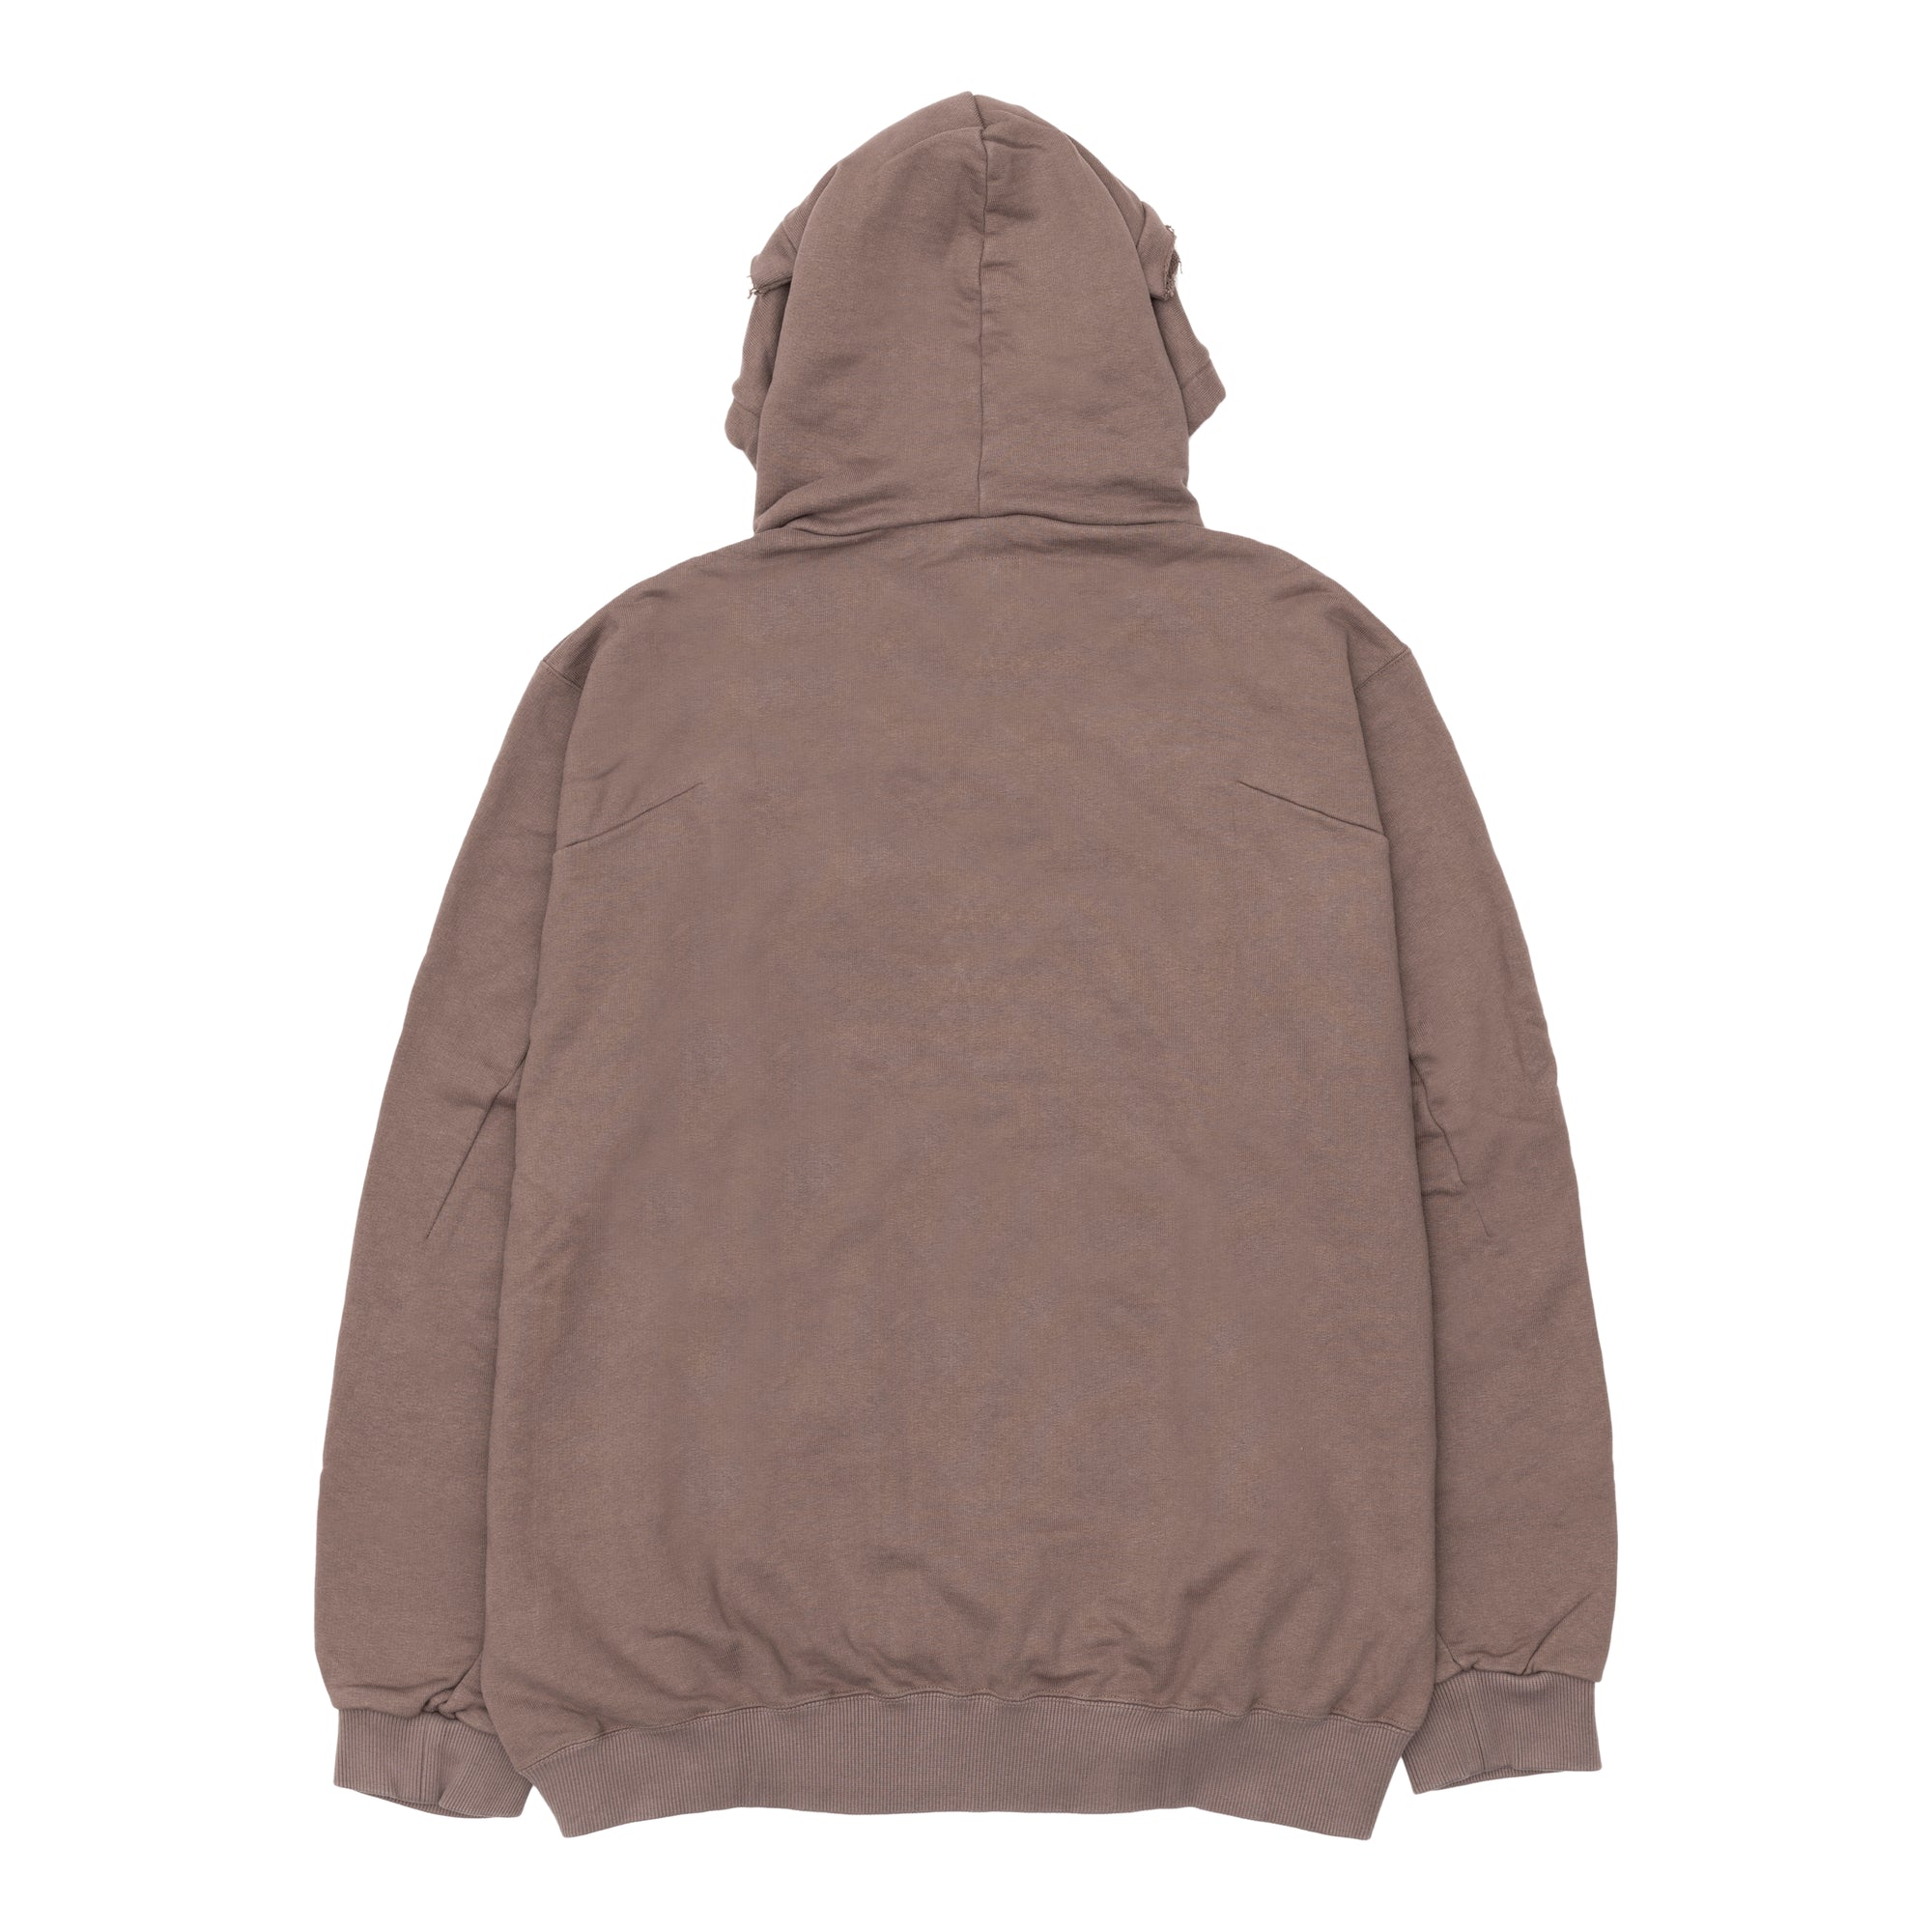 DOUBLET - "Doubland" Embroidery Hoodie - (Grey) view 2